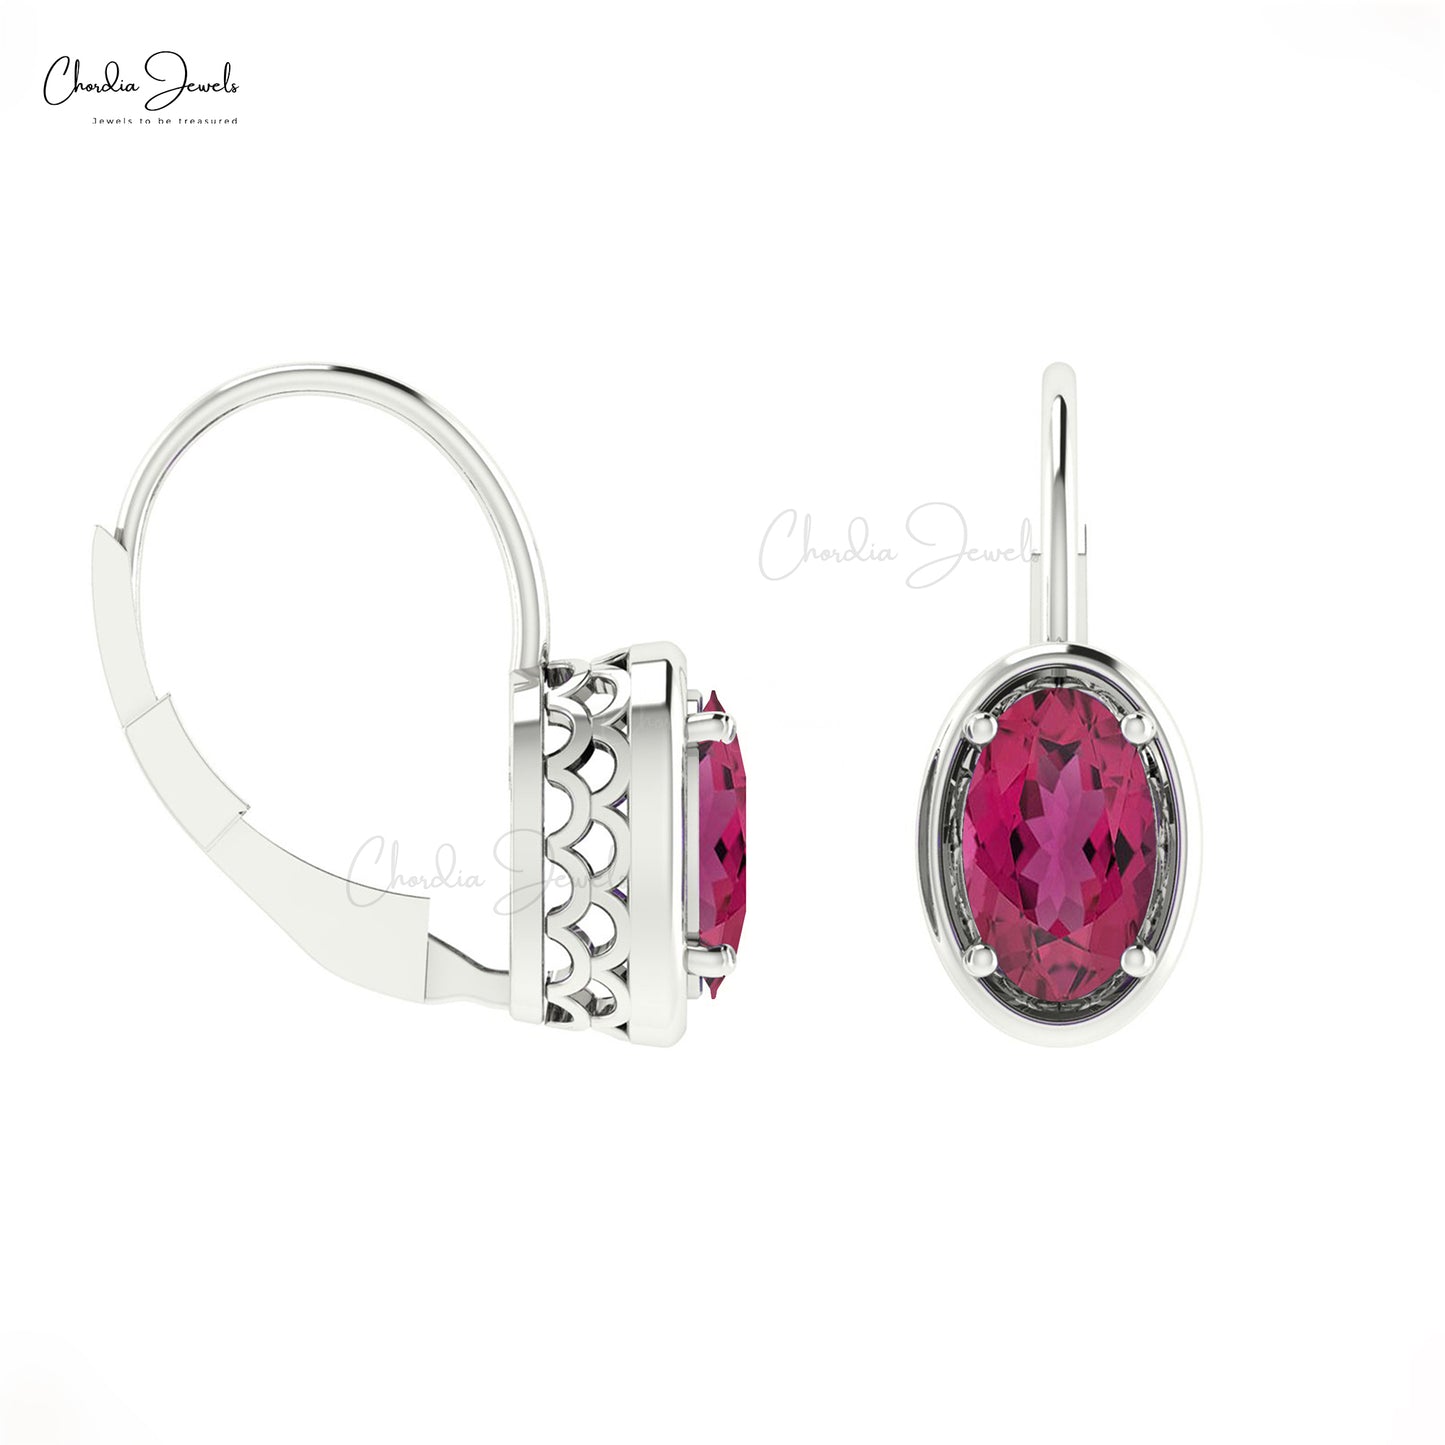 Solitaire 1.4Ct Pink Tourmaline Lever Back Earrings In 14k White Gold Jewelry